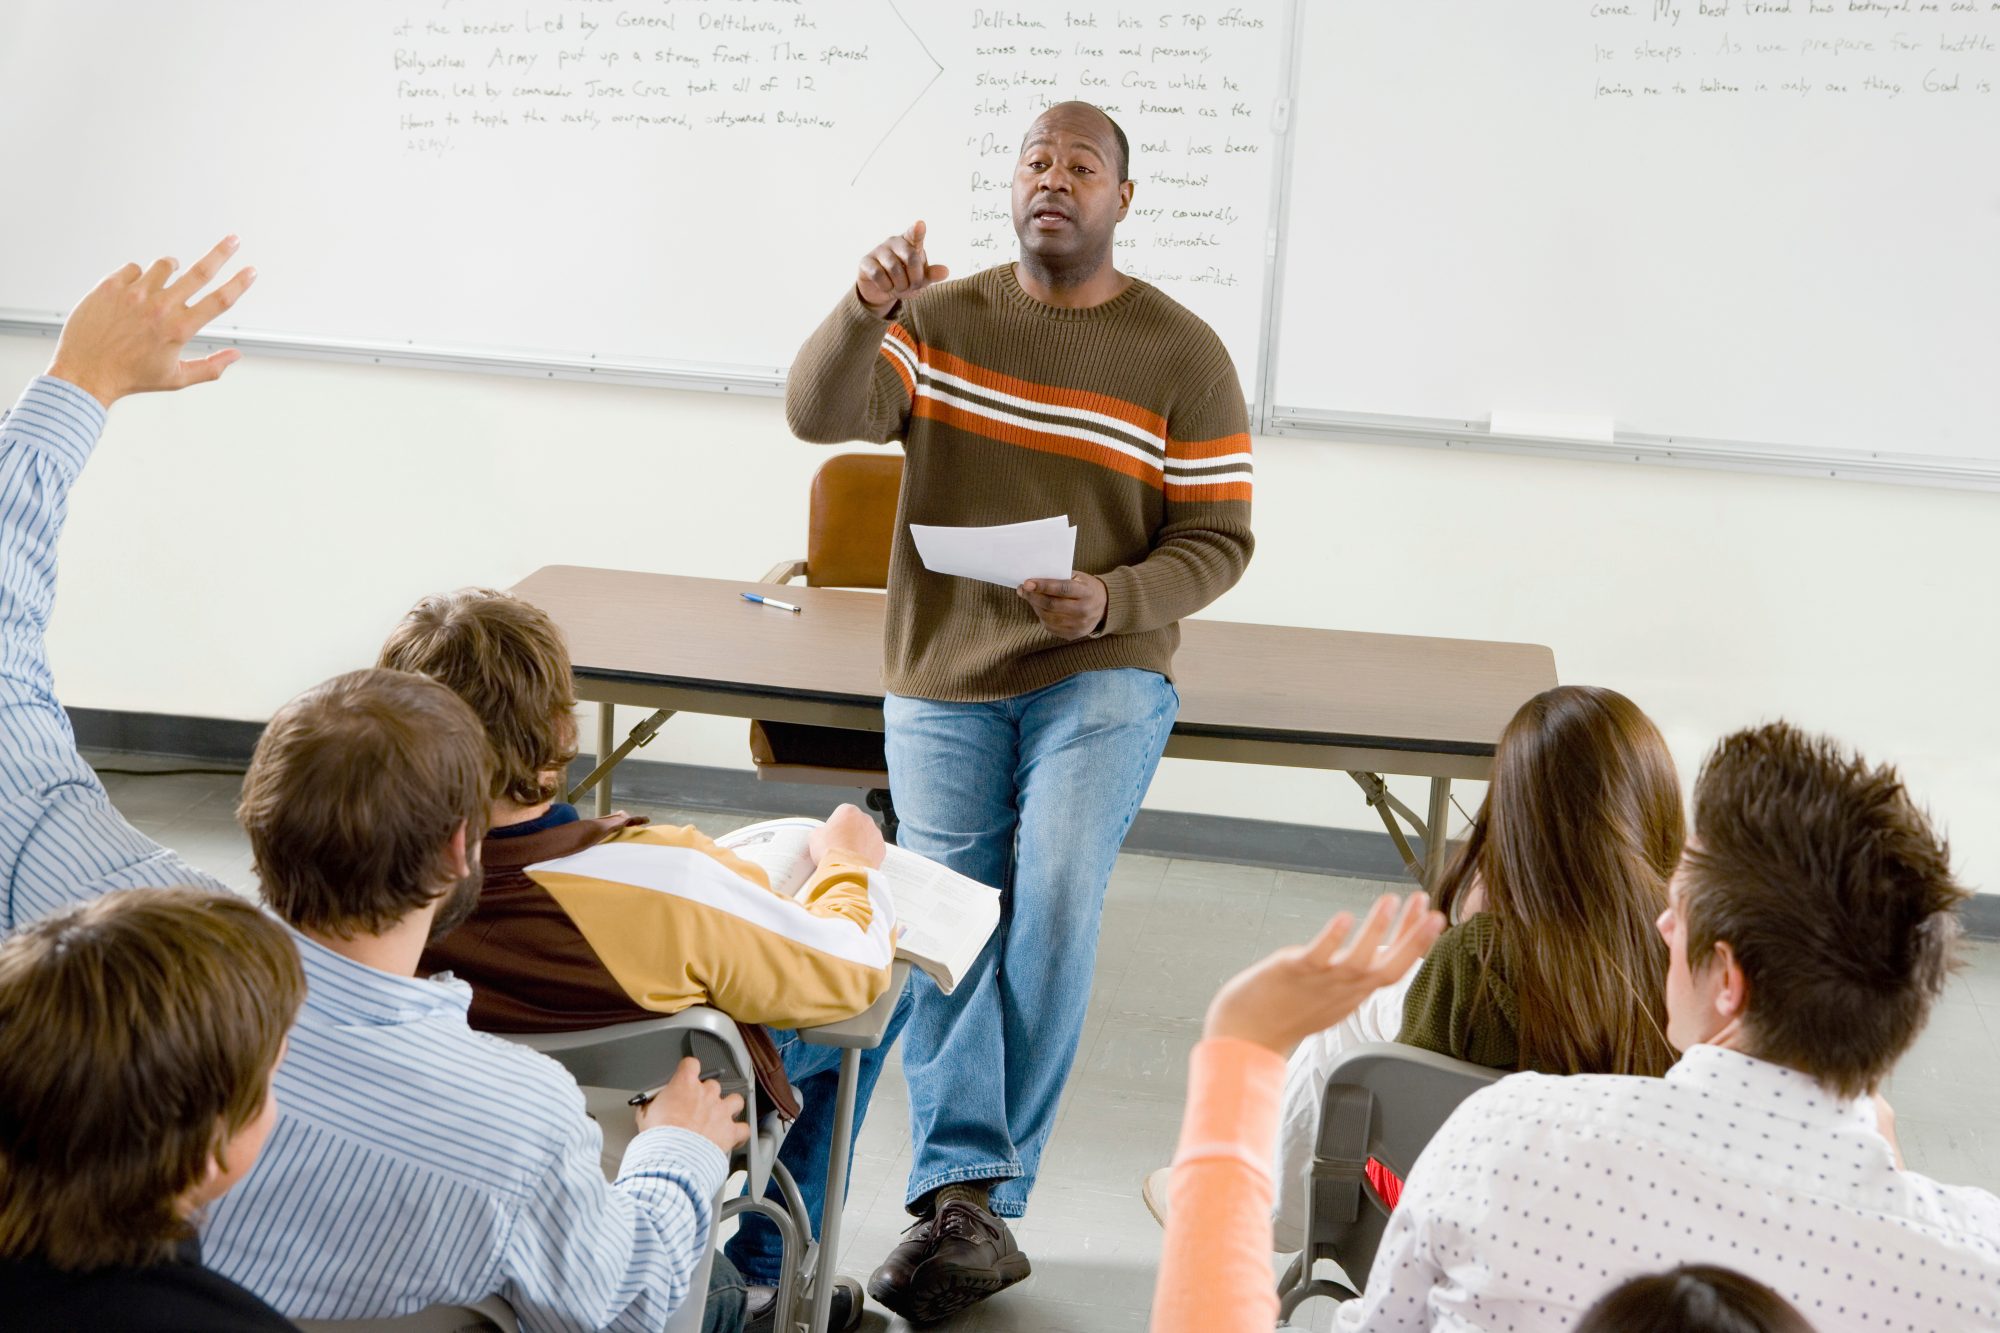 Professor pointing at college student with hands raised in classroom.